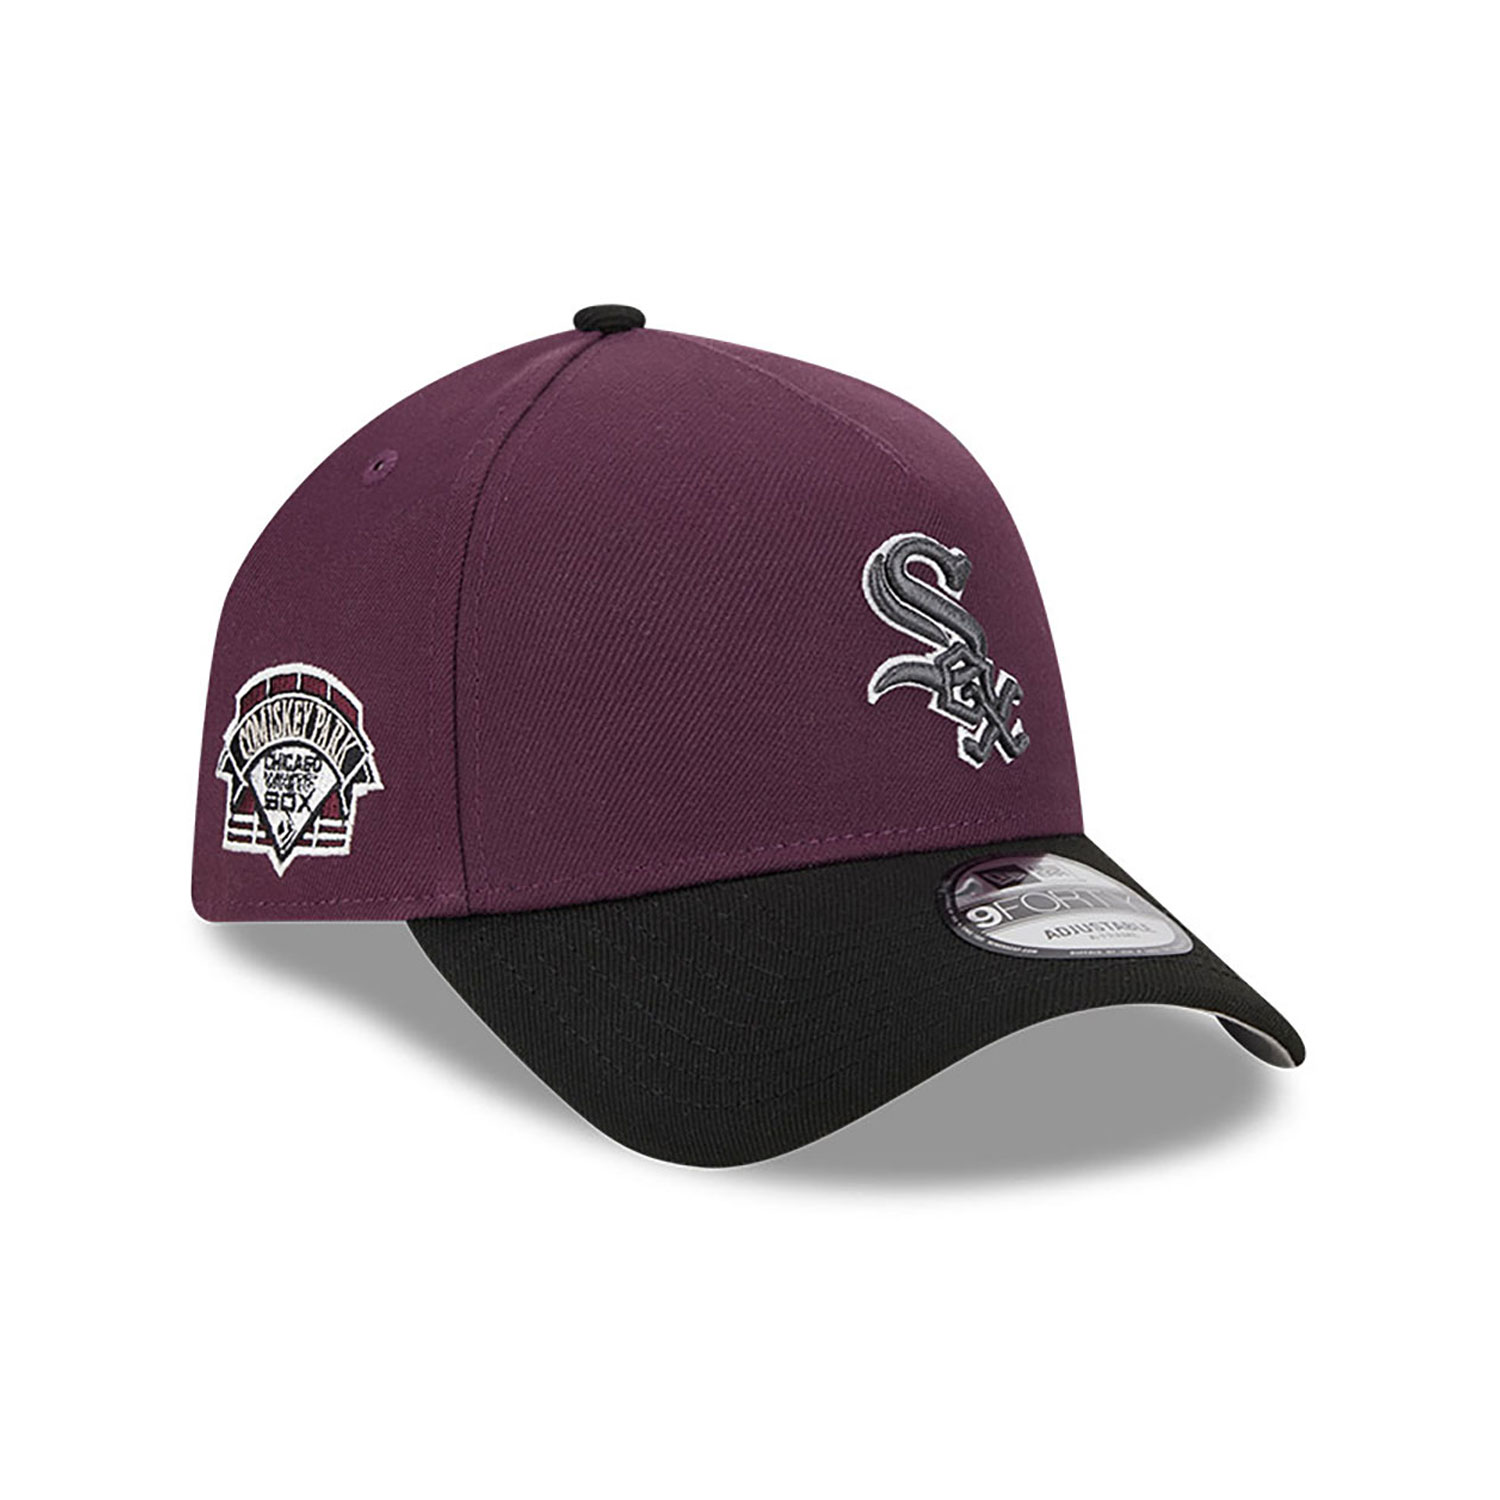 Chicago White Sox Two-Tone Dark Purple 9FORTY A-Frame Adjustable Cap